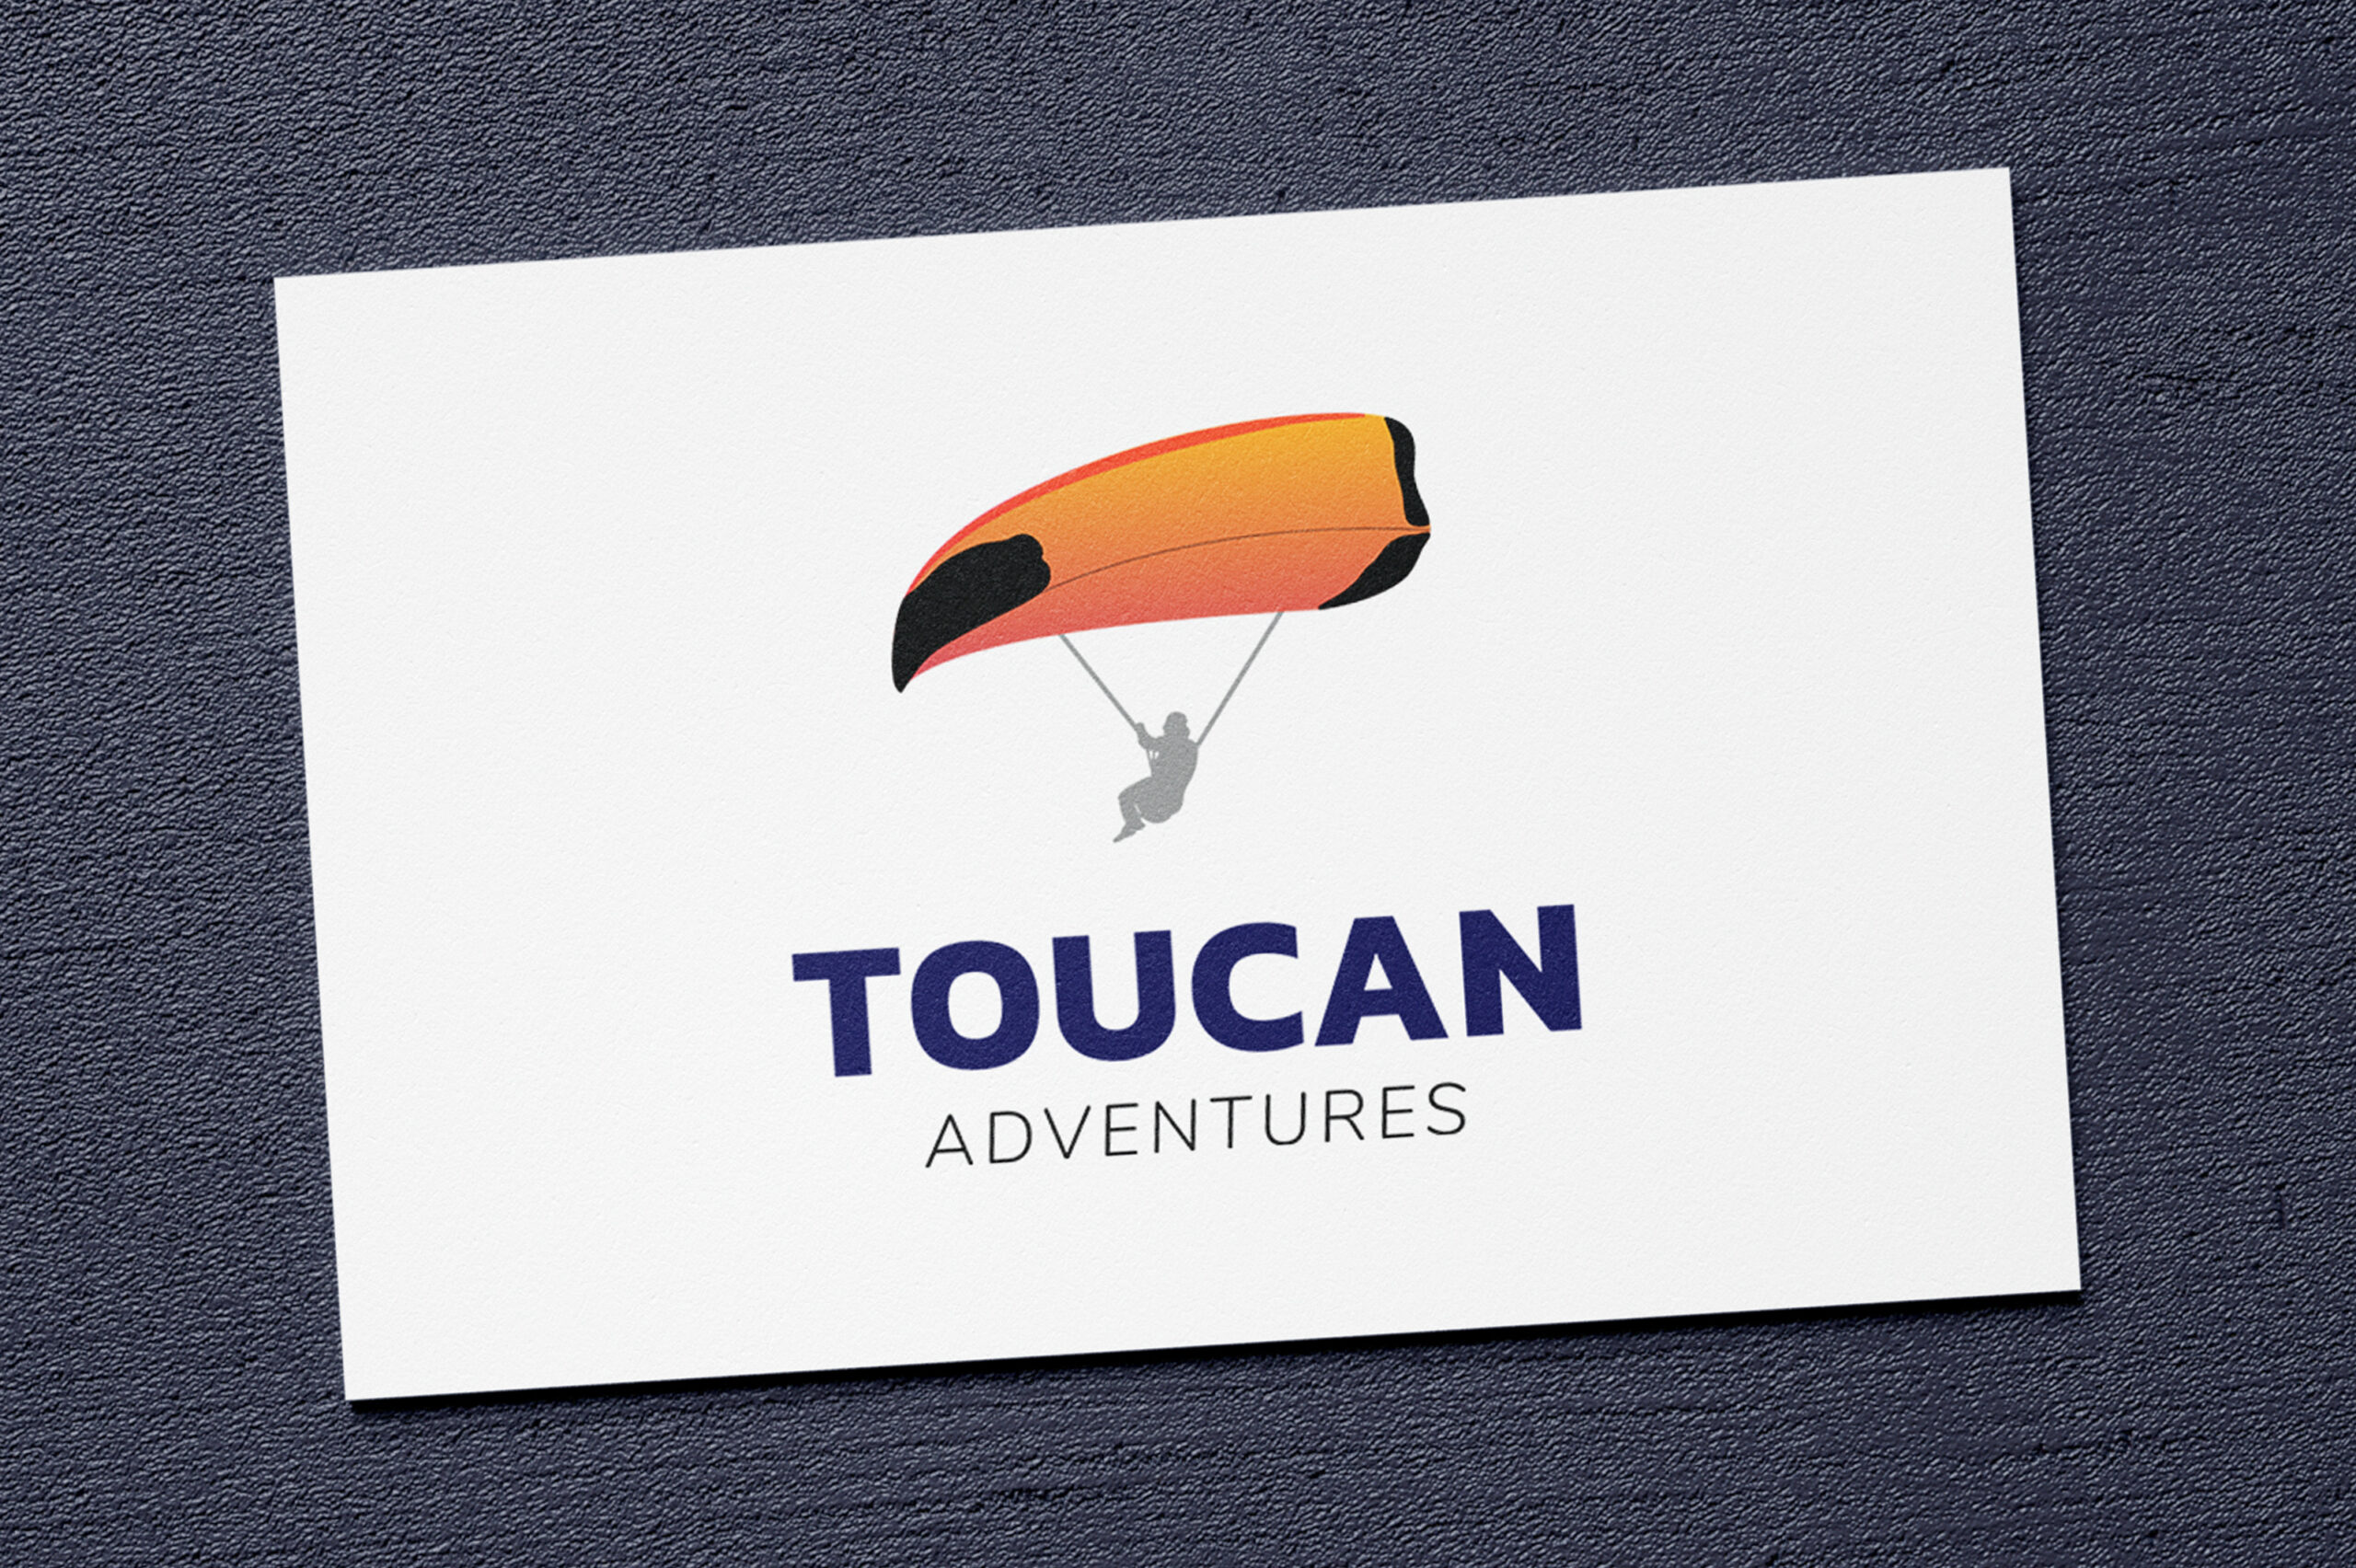 Logo Design for Toucan Adventures, catered for package activity holidays. Made by Jon Glanville - Plymouth Graphic Designer.